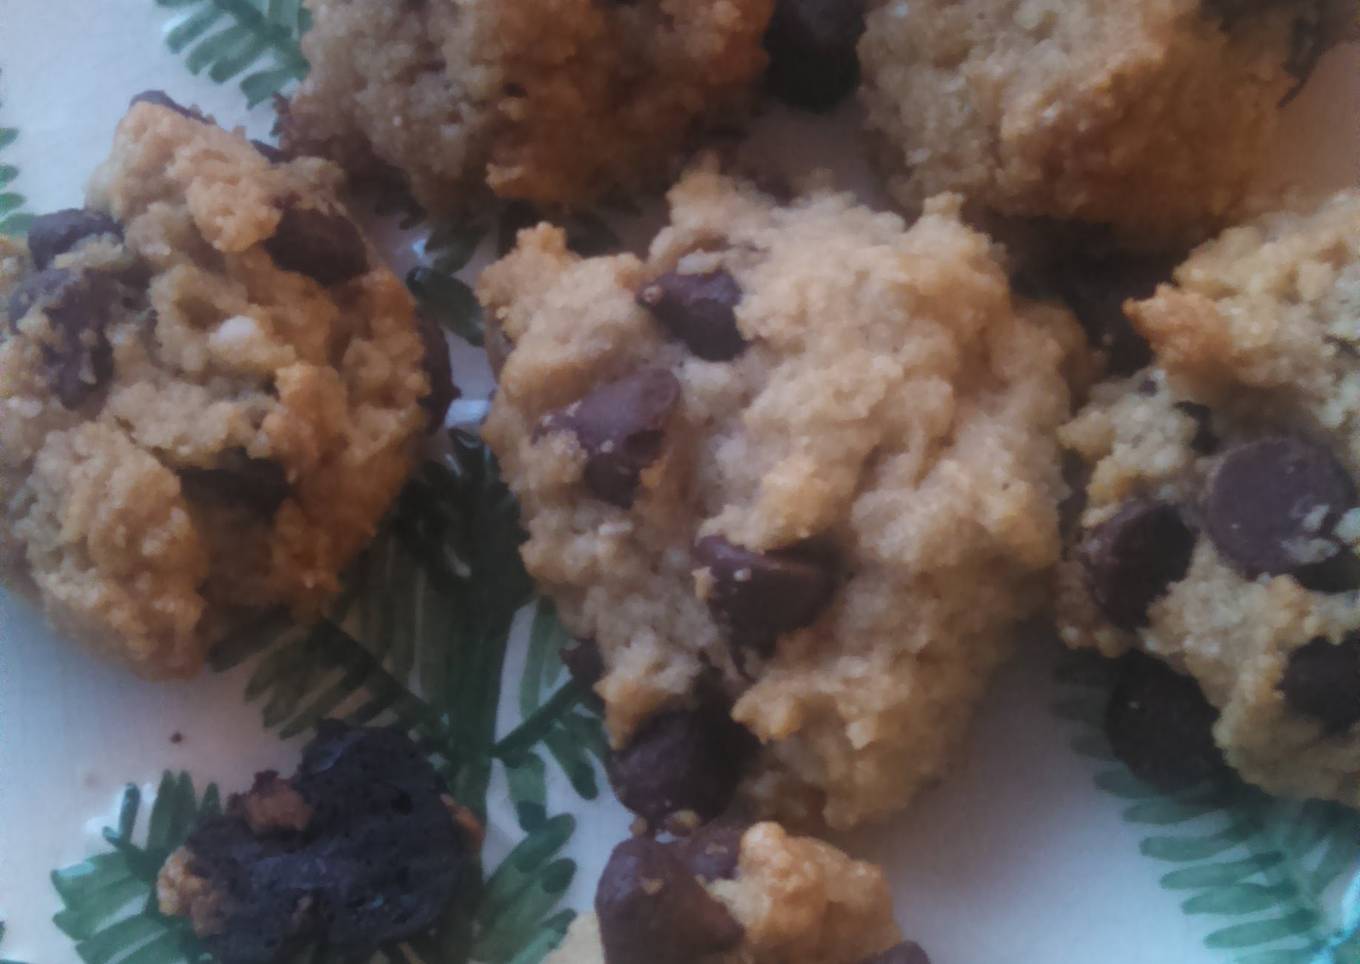 Wheat-free Almond Flour Chocolate Chip Cookies Light and Airy!